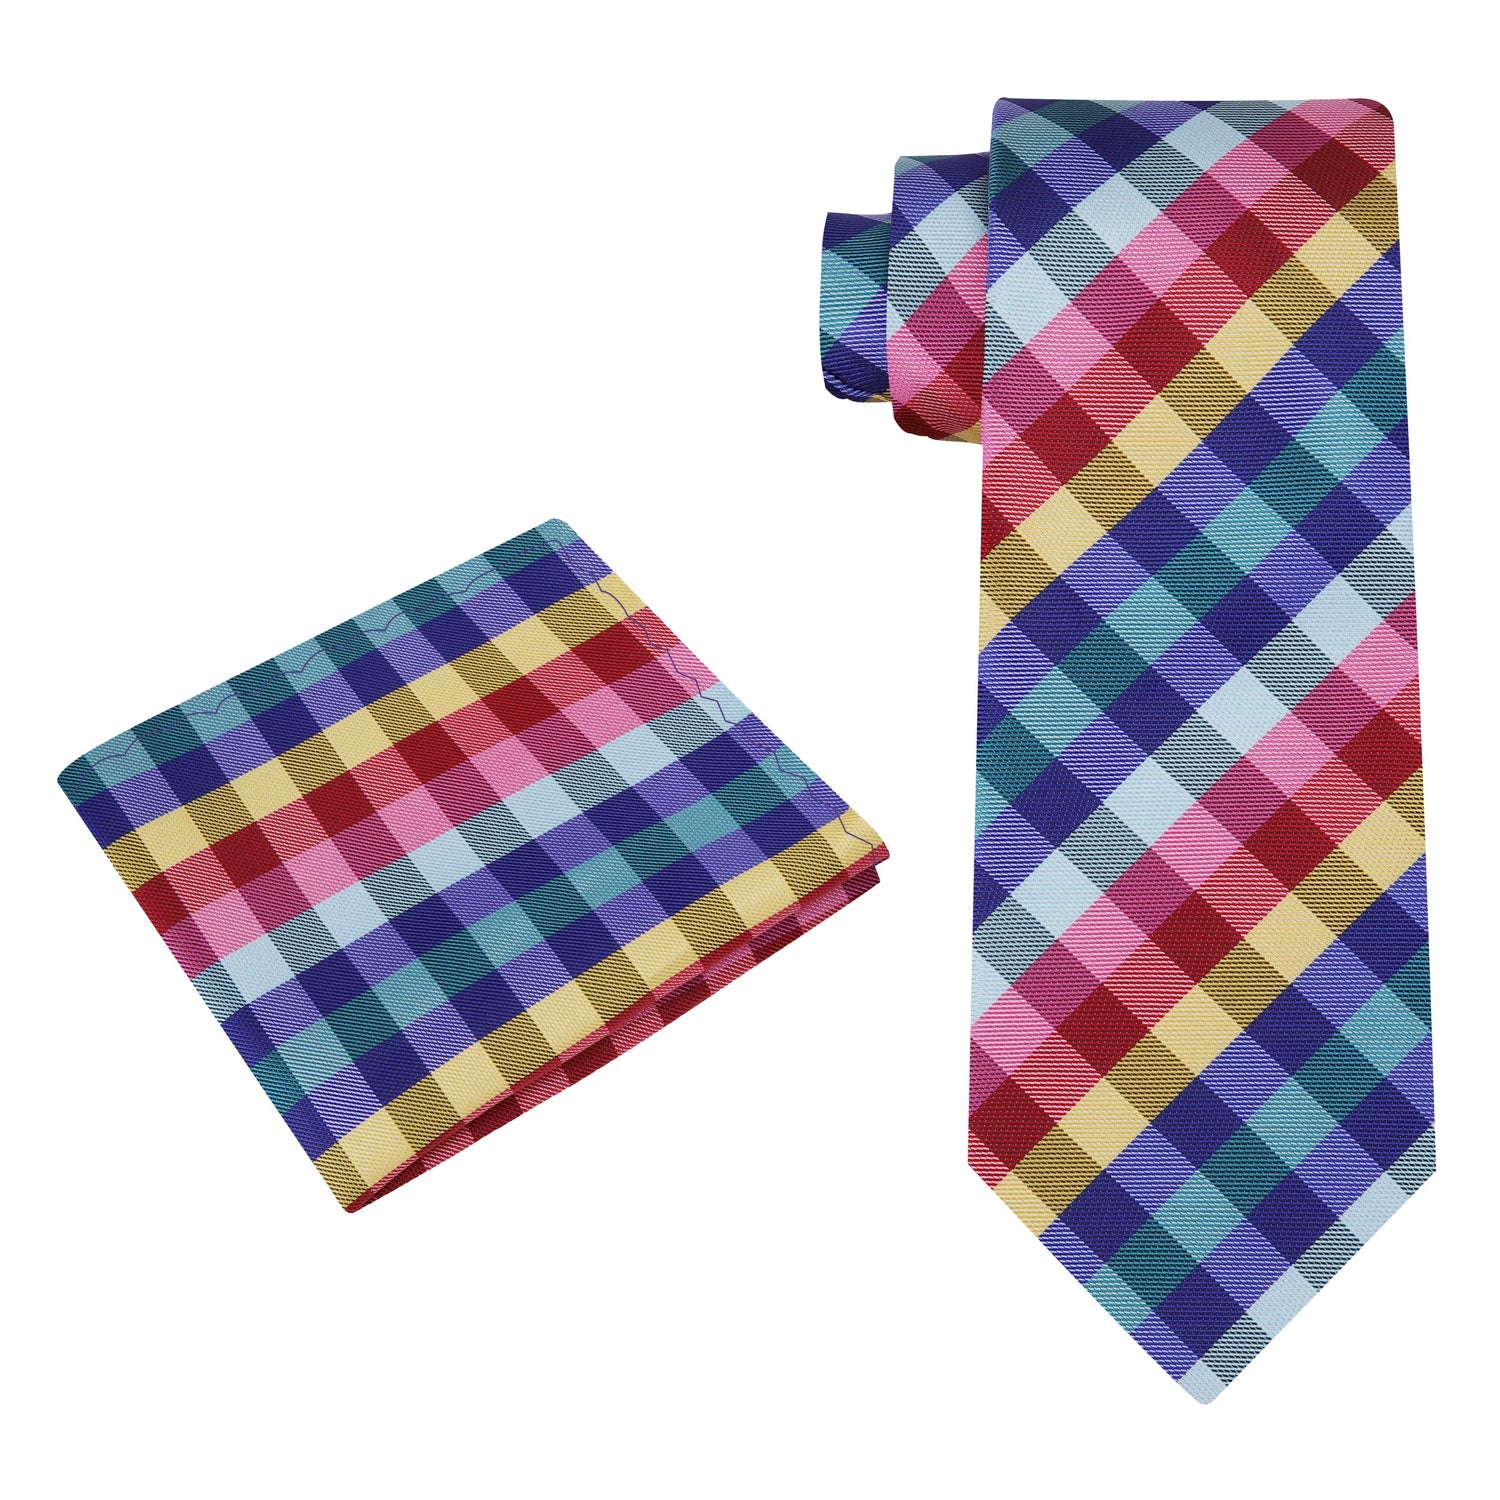 Alt View: A Red, Green, Yellow, Blue Small Geometric Check Pattern Silk Necktie, With Matching Pocket Square